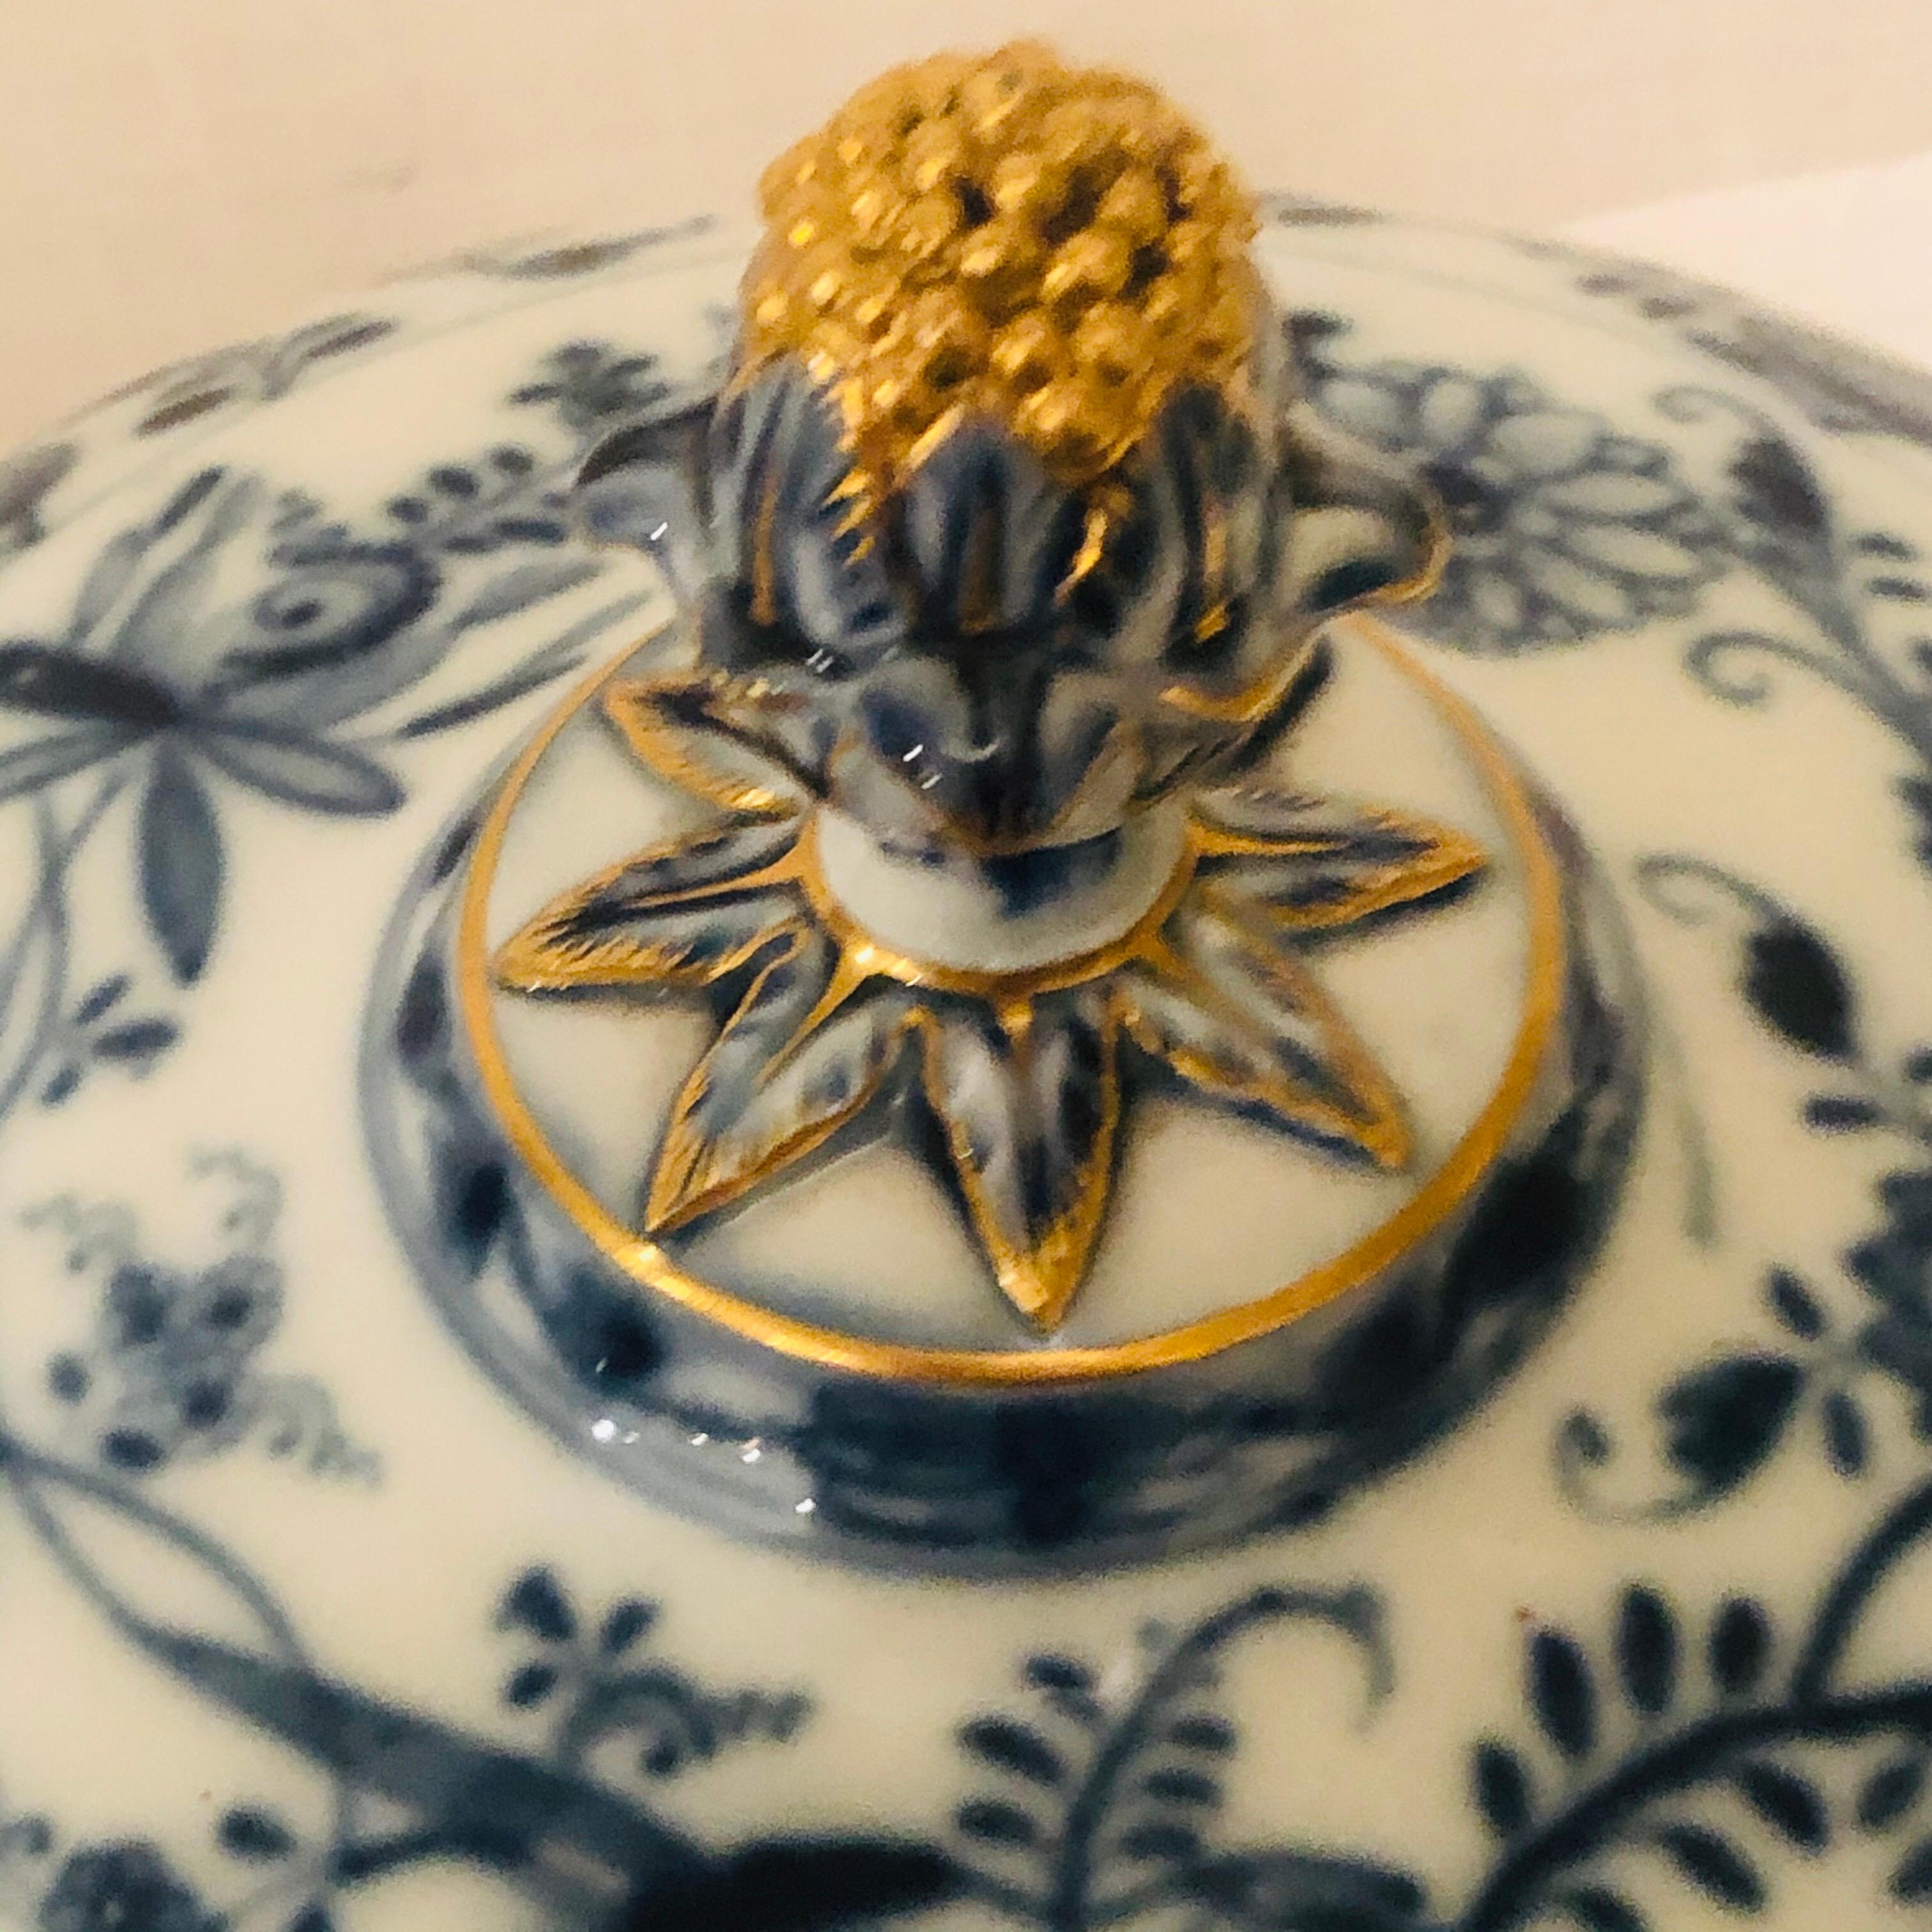 I am proud to present you with this fabulous Meissen blue onion serving piece. I do not think I have ever seen a Meissen serving piece like this. It is a covered serving bowl or pot with gold decorated accents. It is quite the presentation piece.